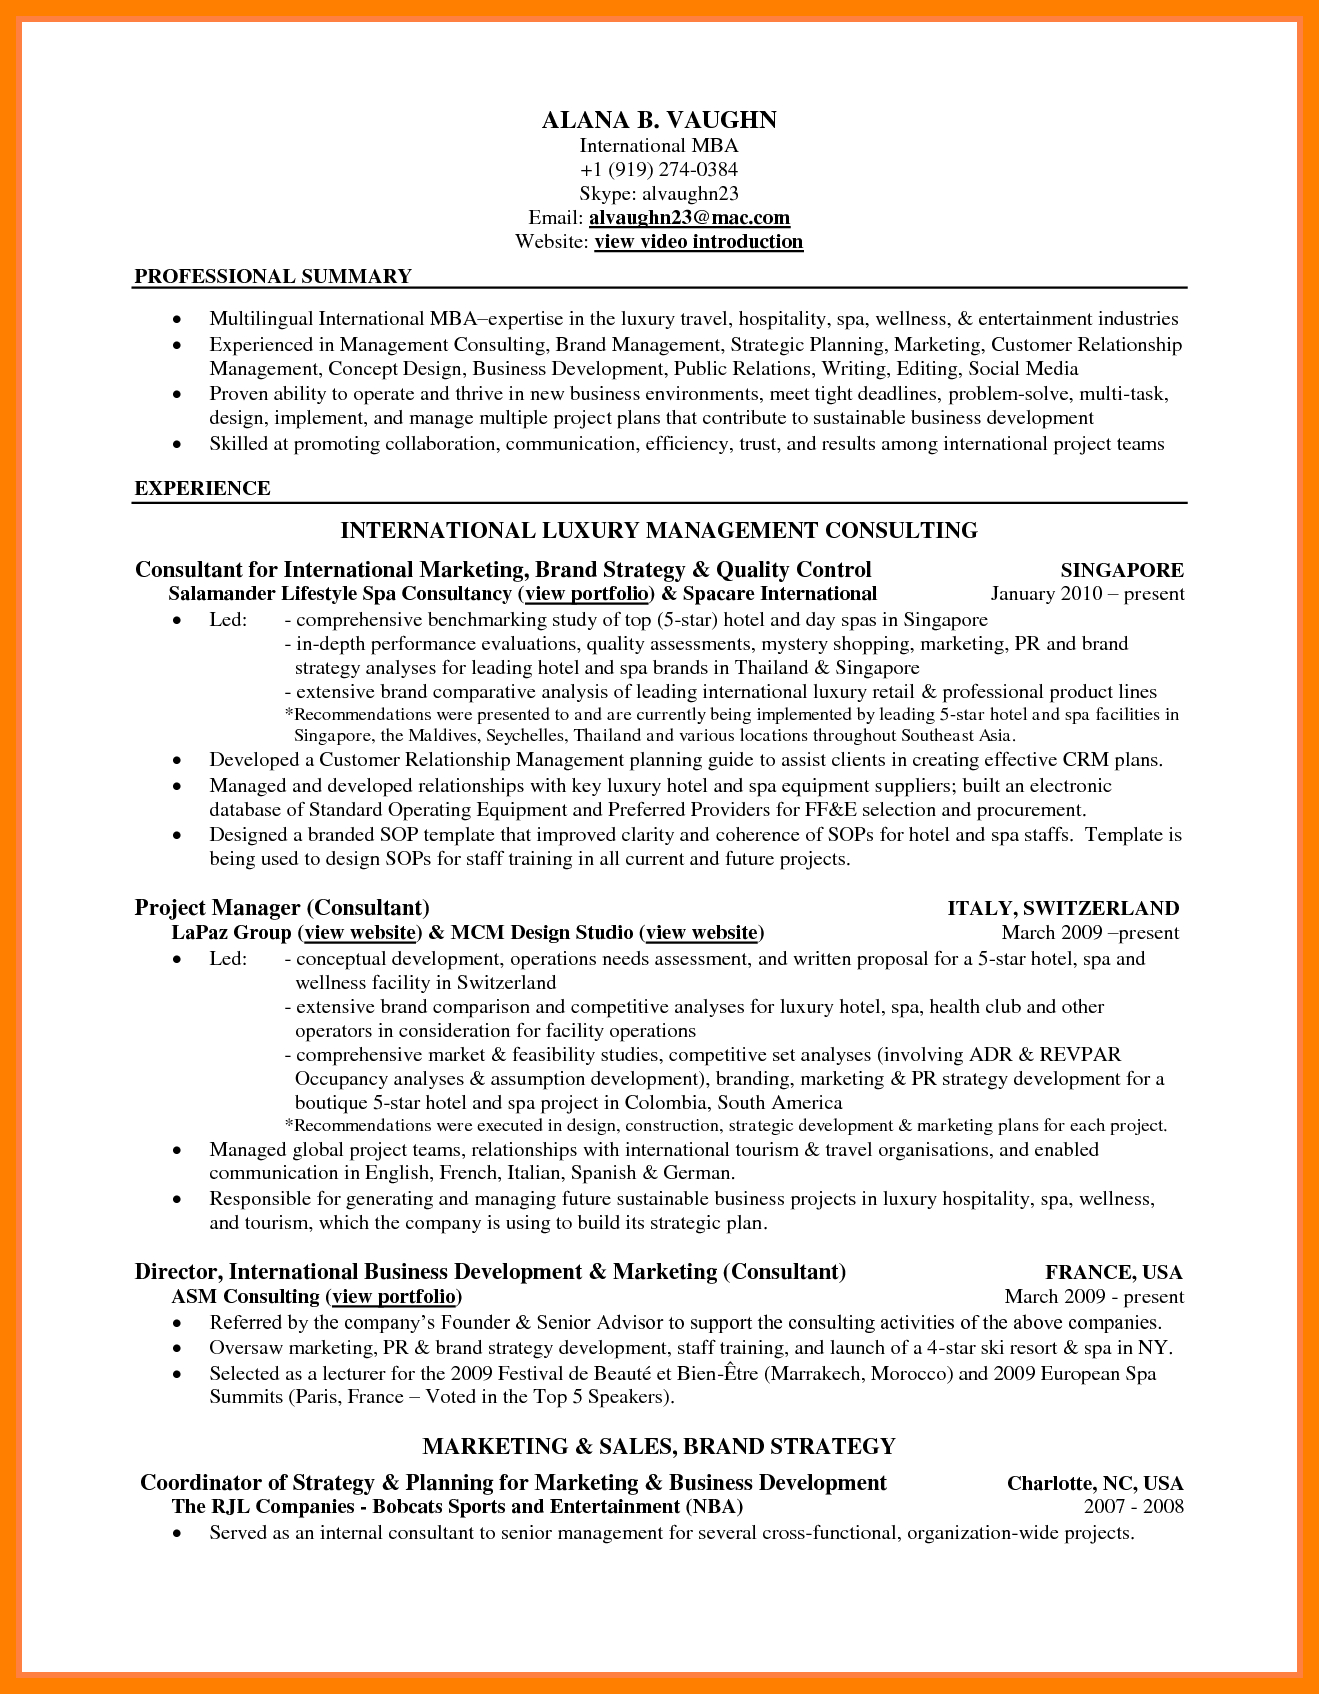 Consultant Report Template 11 Top Risks Of Attending For Consultant Report Template